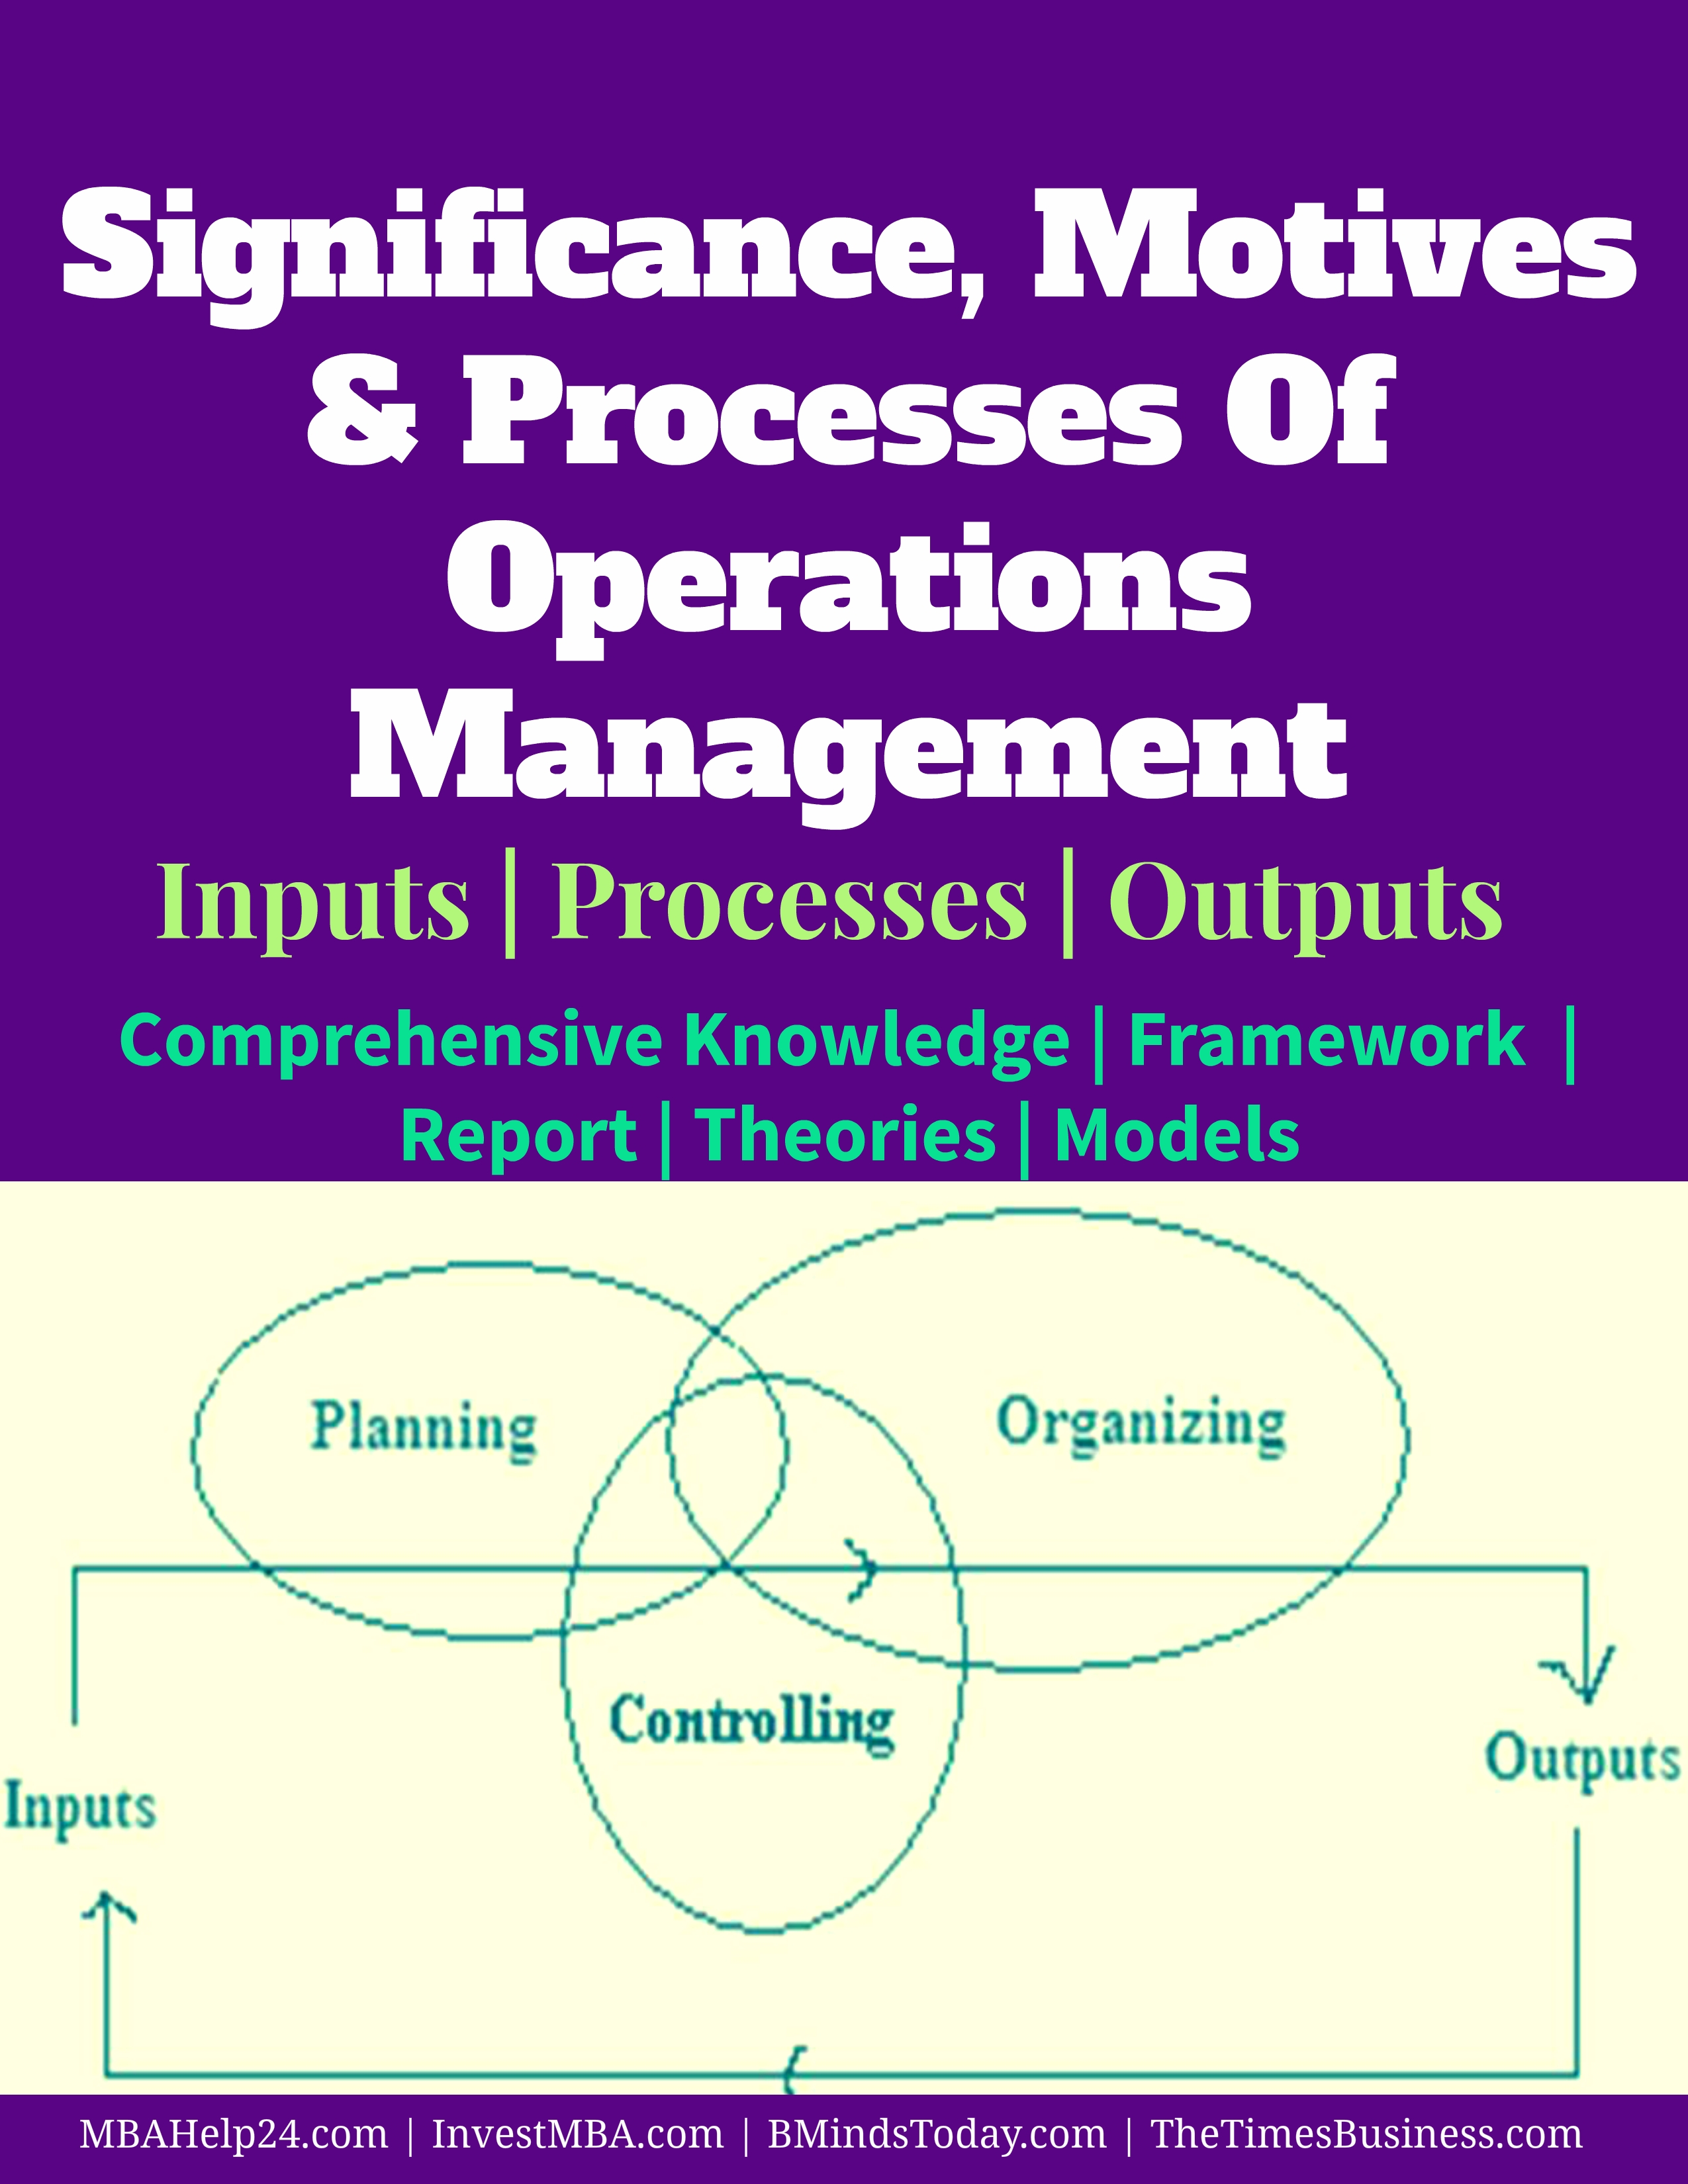 Significance, motives and processes of Operations Management operations management Processes Of Operations Management | Significance | Motives | Inputs | Outputs Significance motives and processes of Operations Management